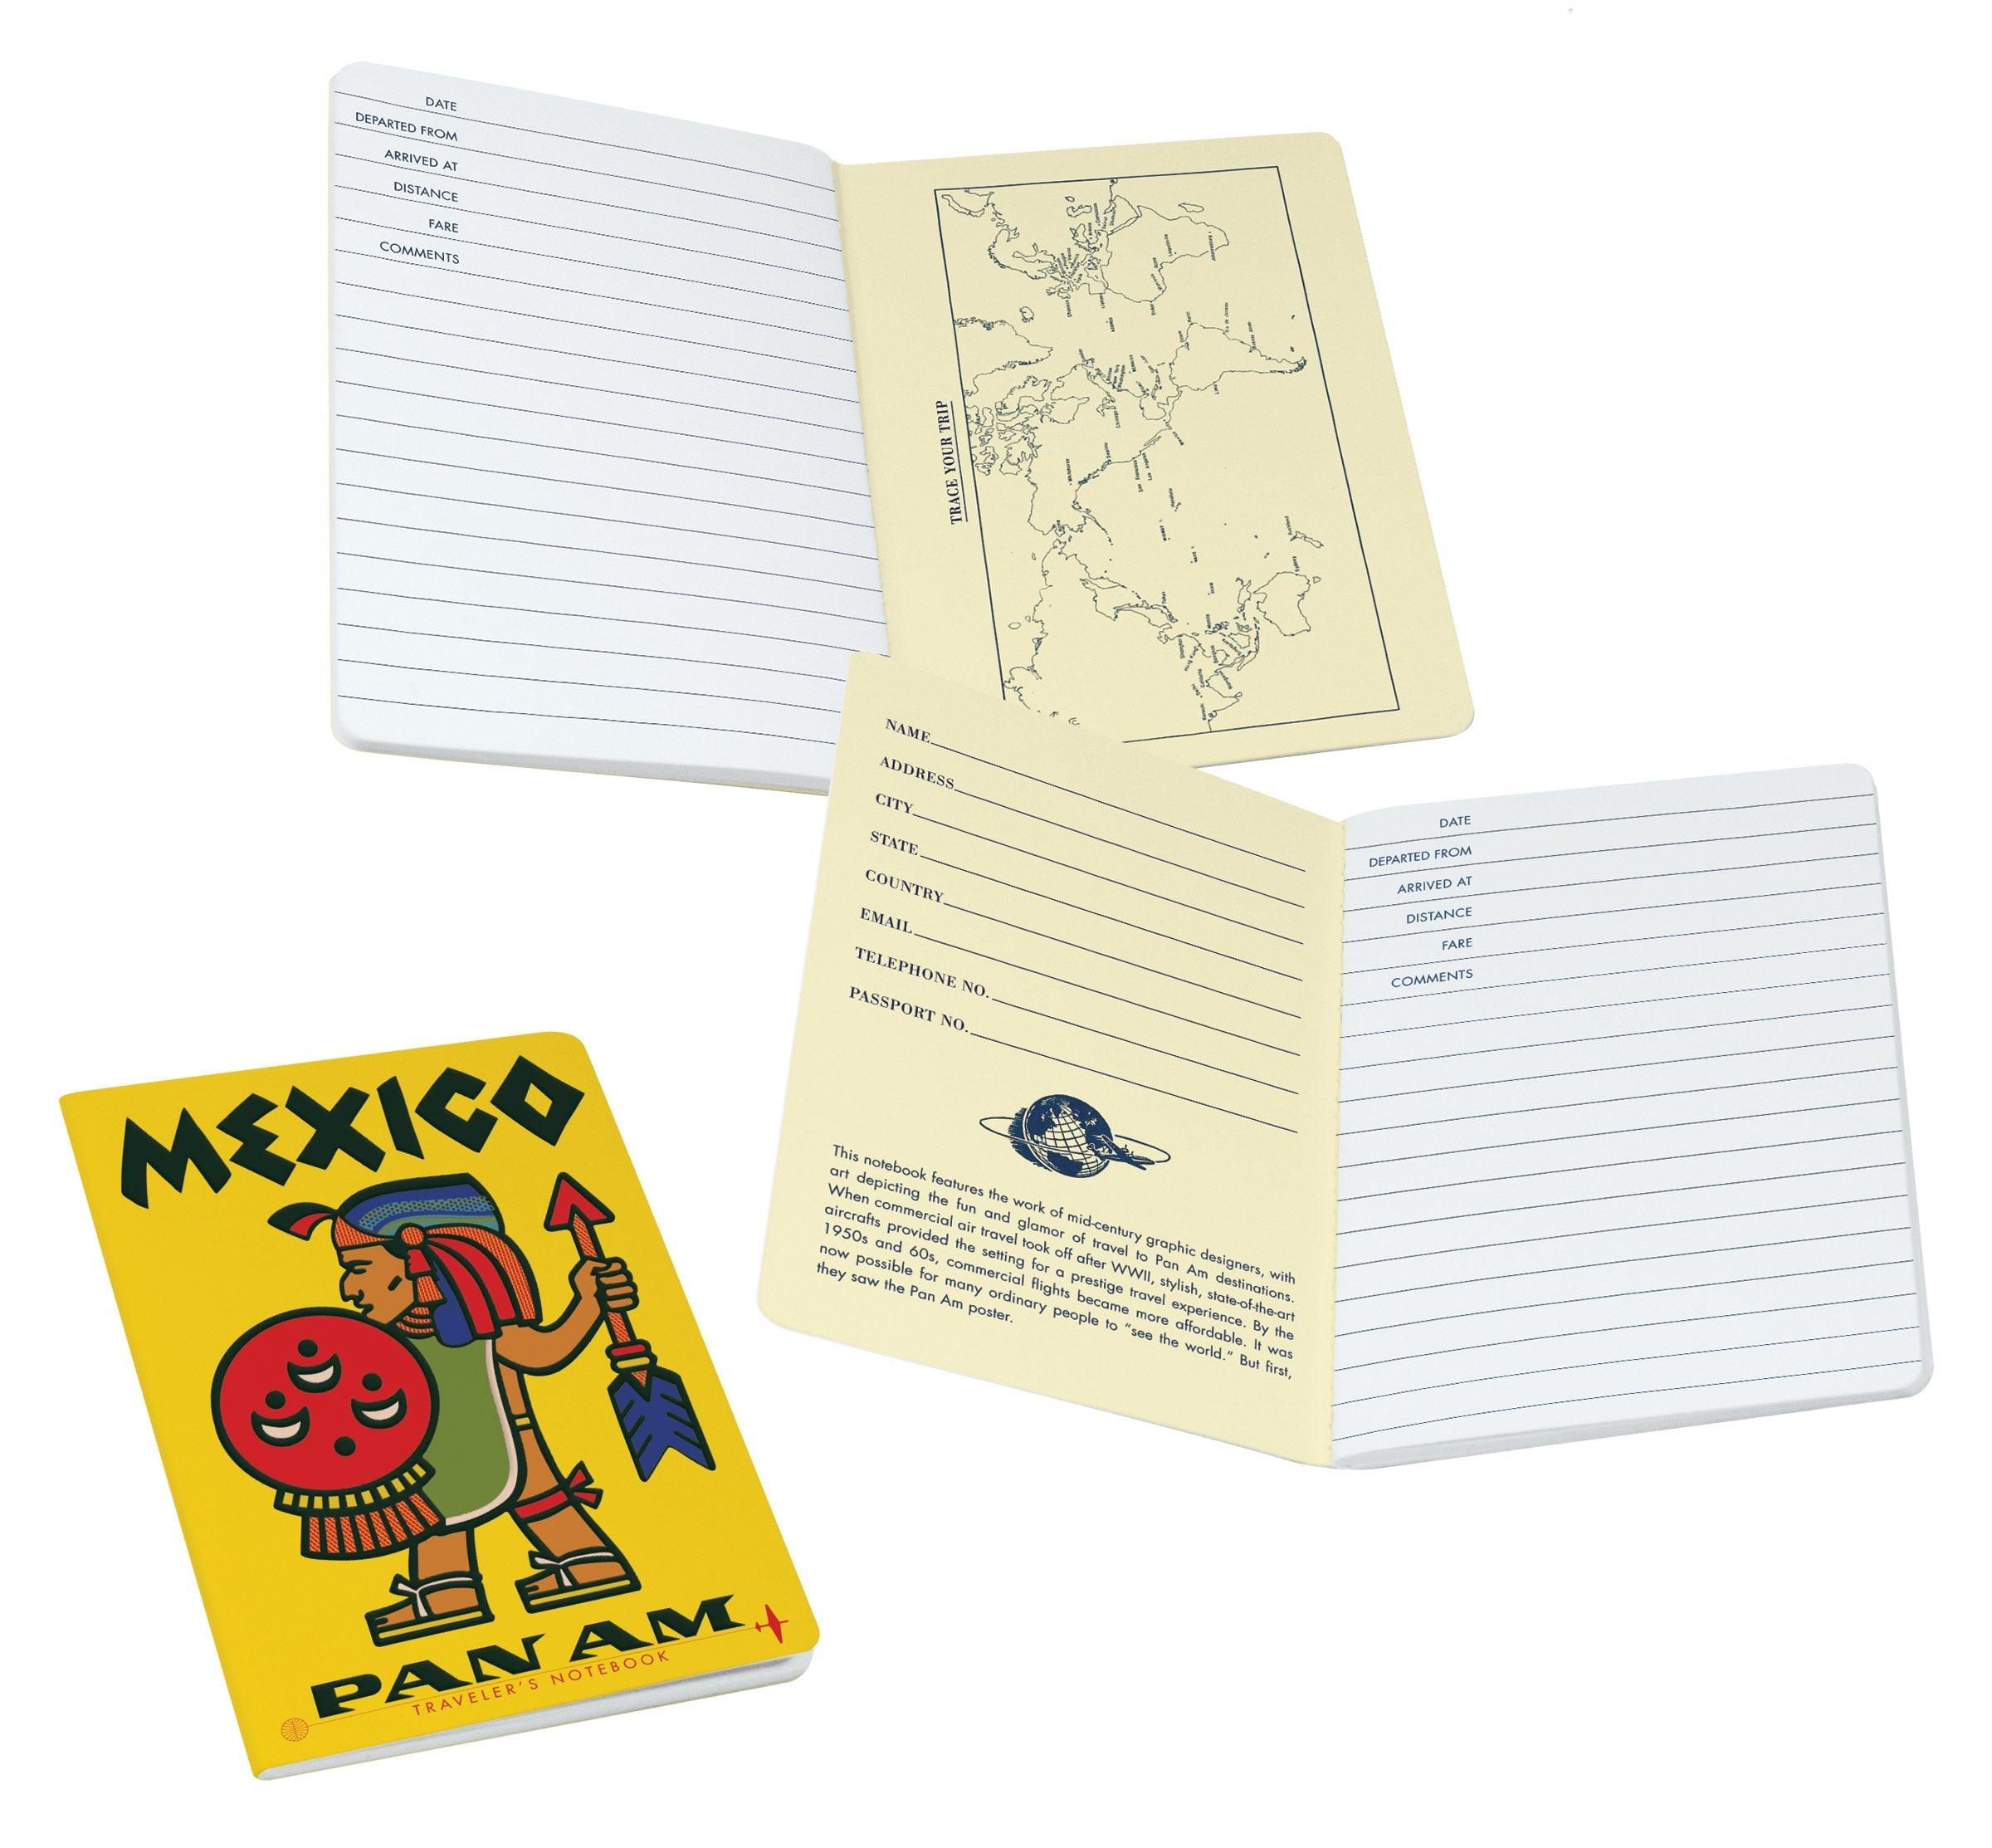 Product photo of Pan Am Mexico Notebook, a novelty gift manufactured by The Unemployed Philosophers Guild.